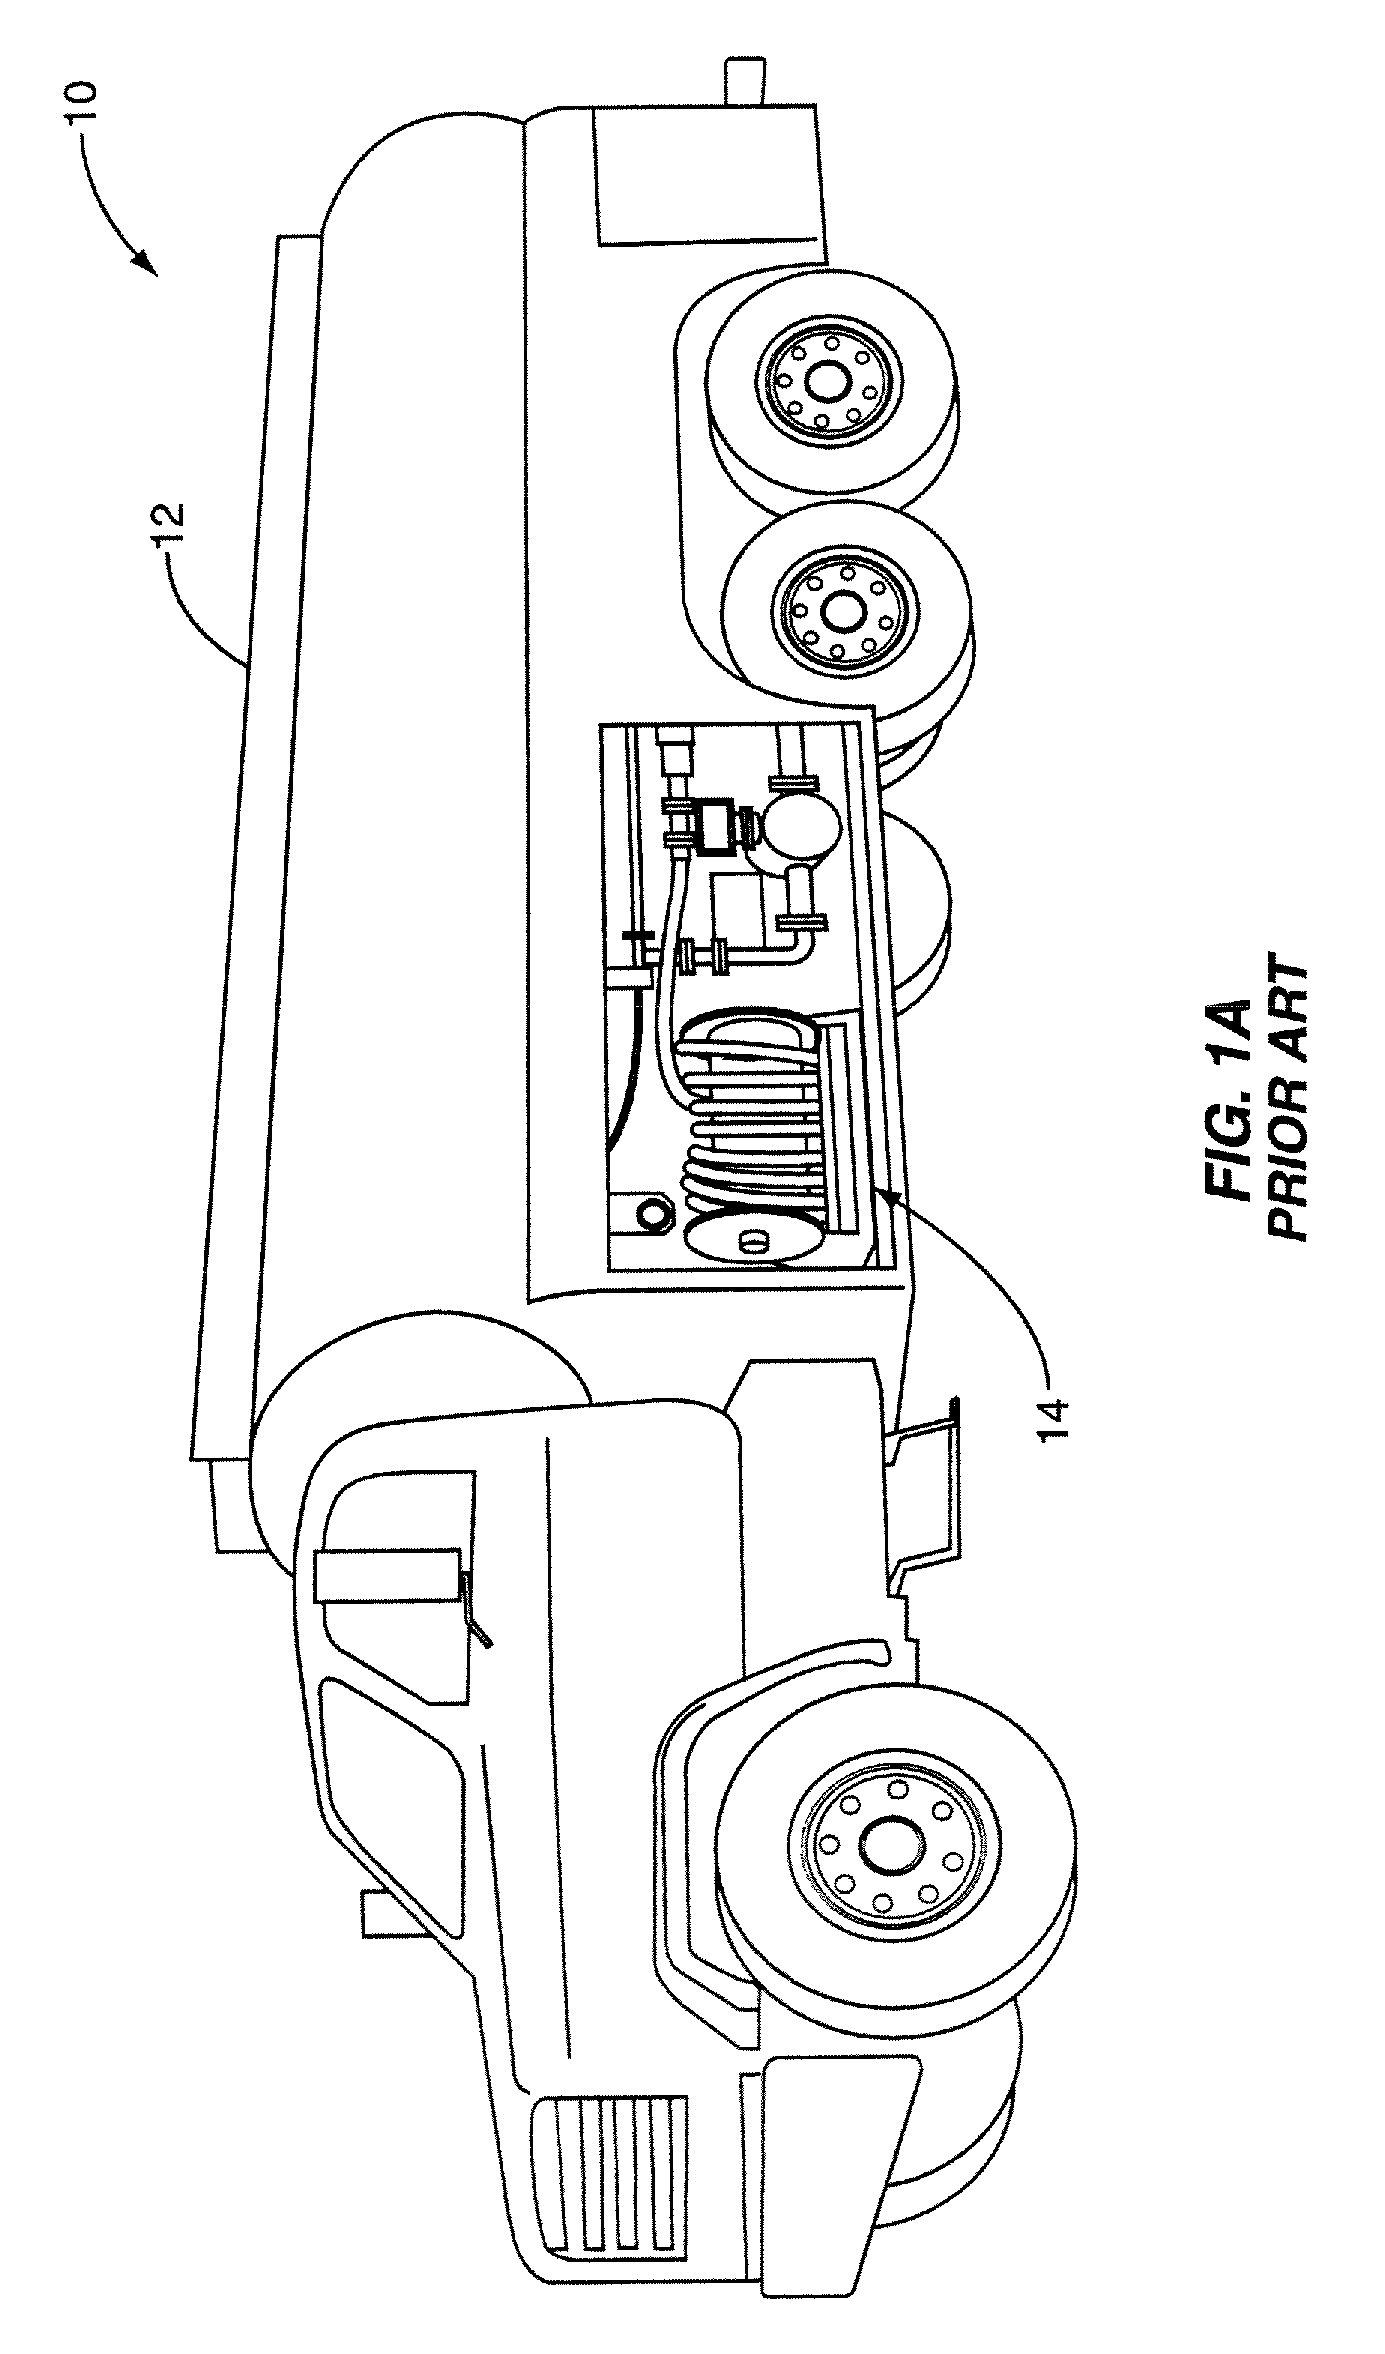 Automated fuel quality detection and dispenser control system and method, particularly for aviation fueling applications